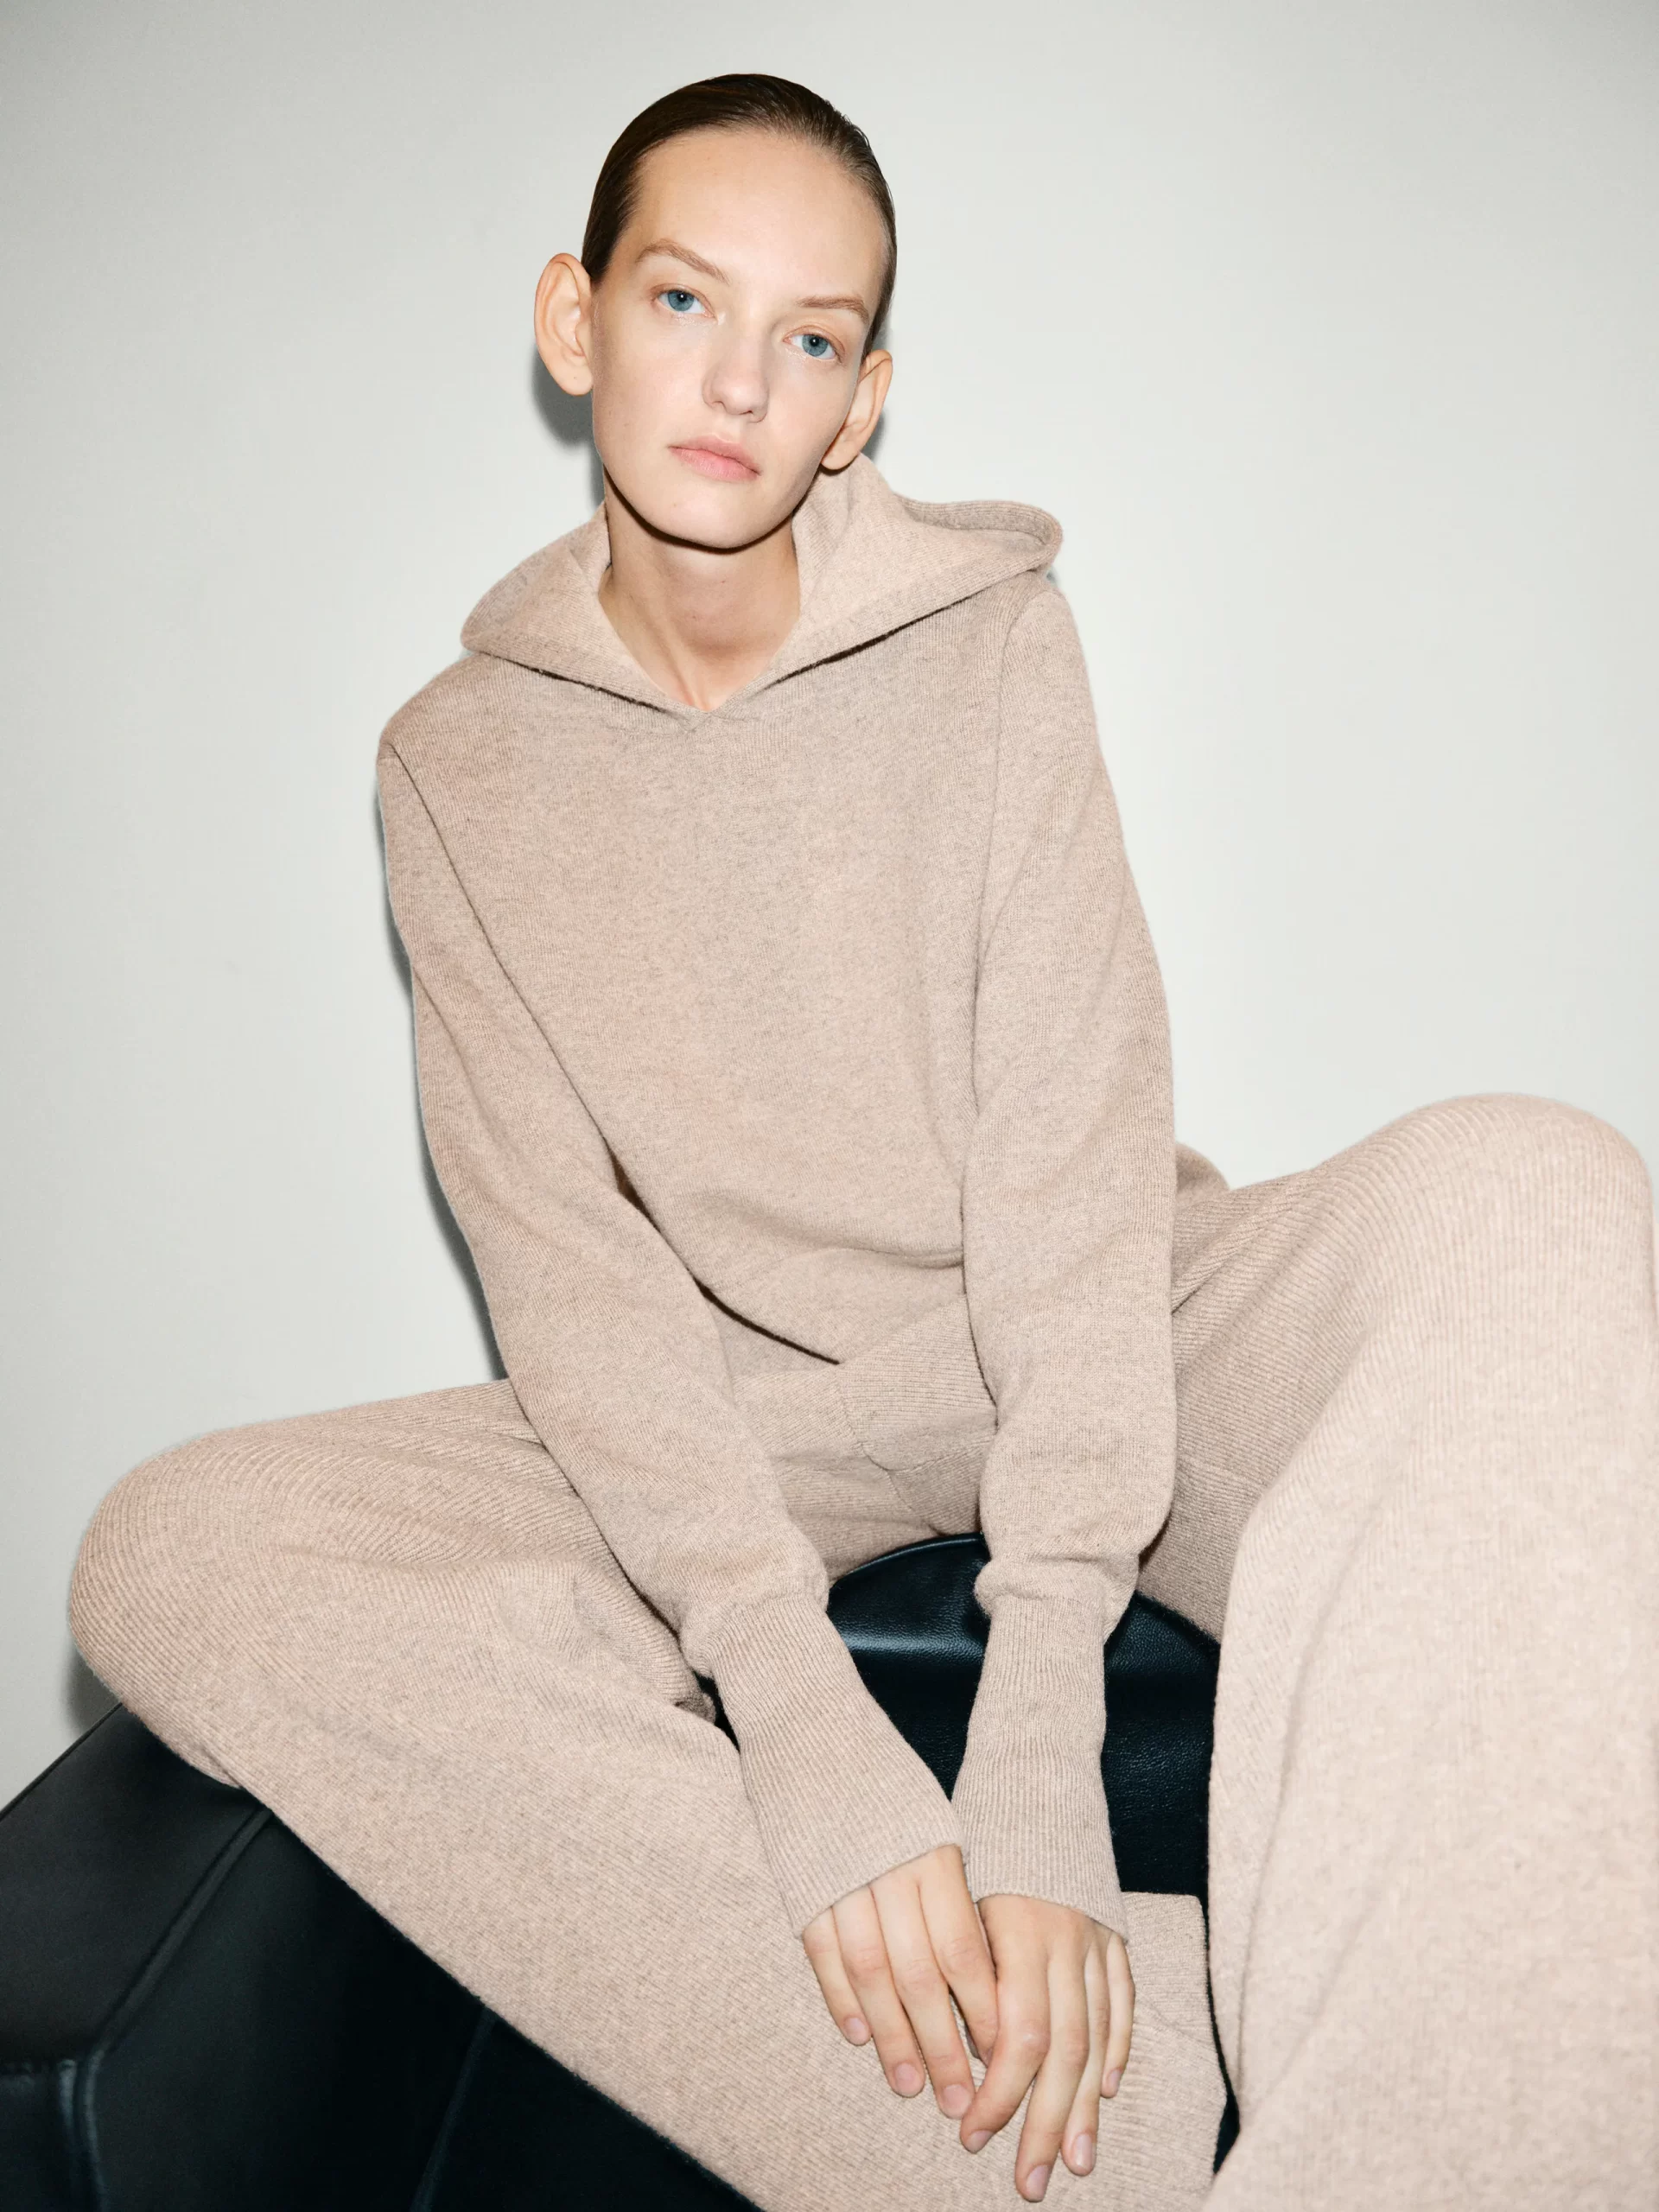 “Stylishly Relaxed: Exploring the Versatility of Loungewear”